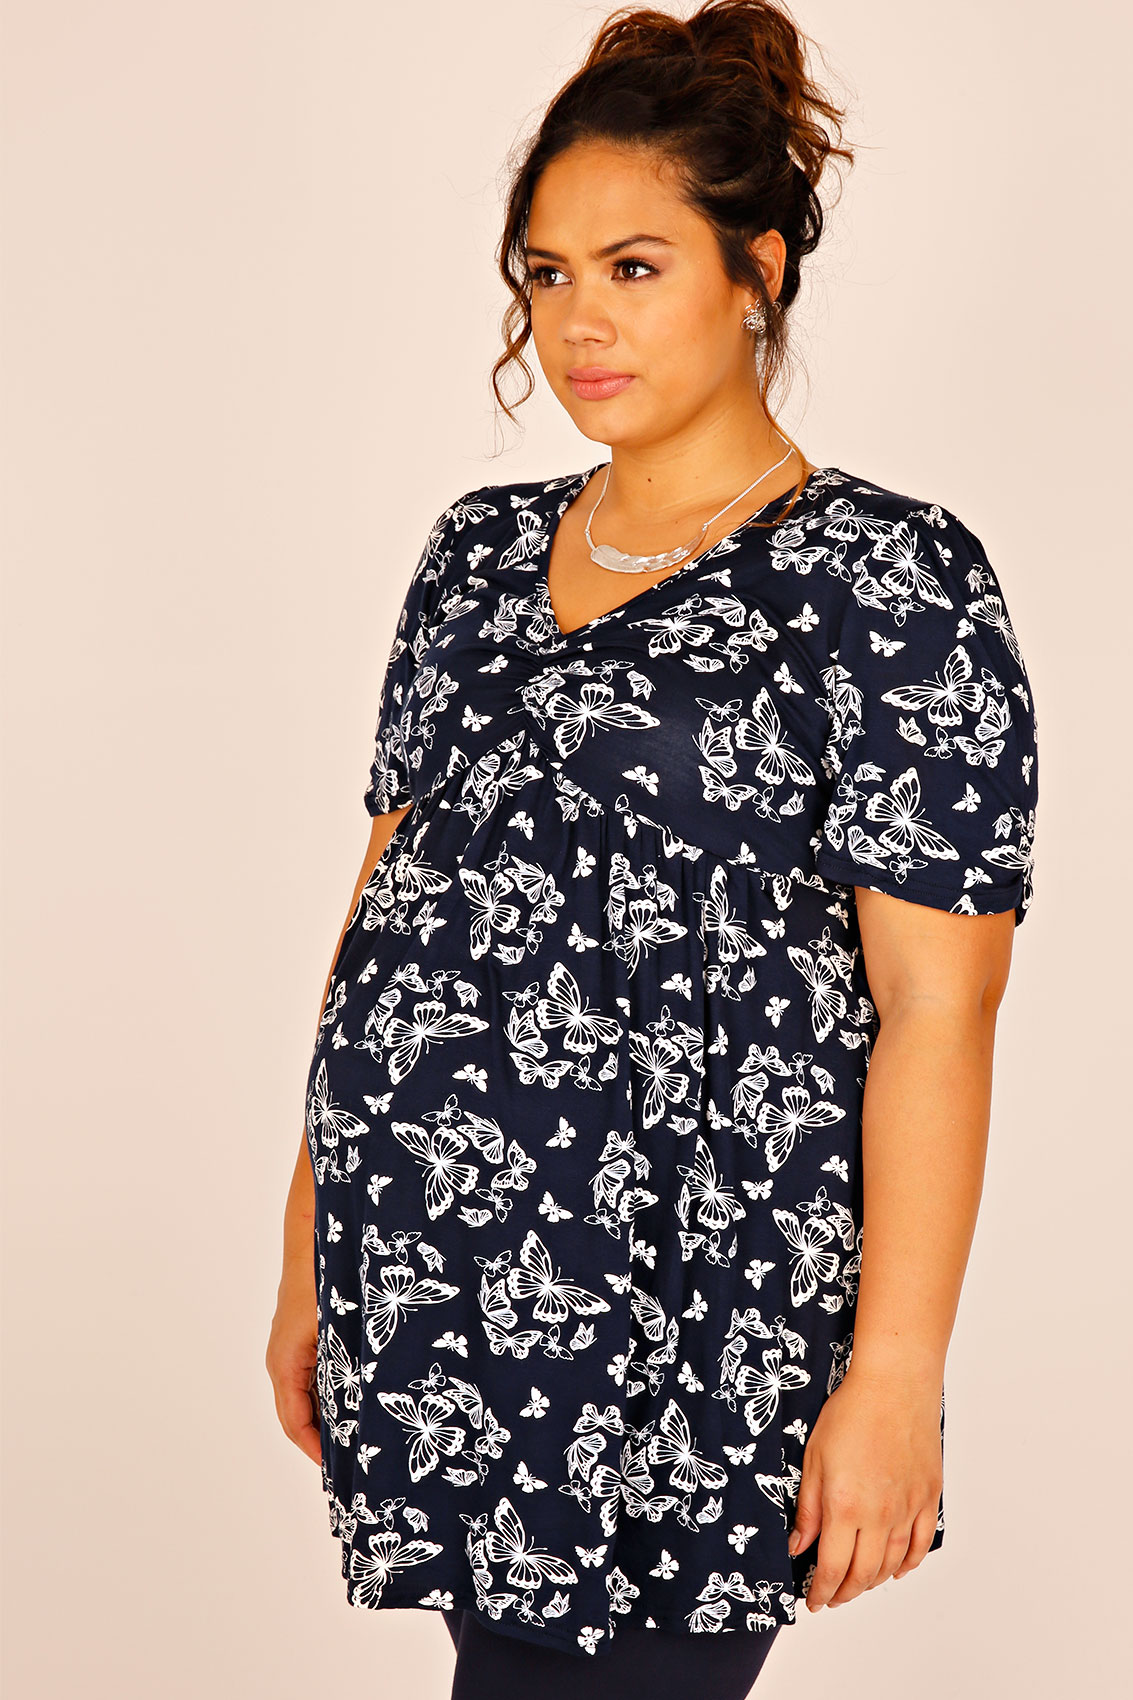 BUMP IT UP MATERNITY Butterfly Print Tunic With Waist Tie Plus Size 16 ...